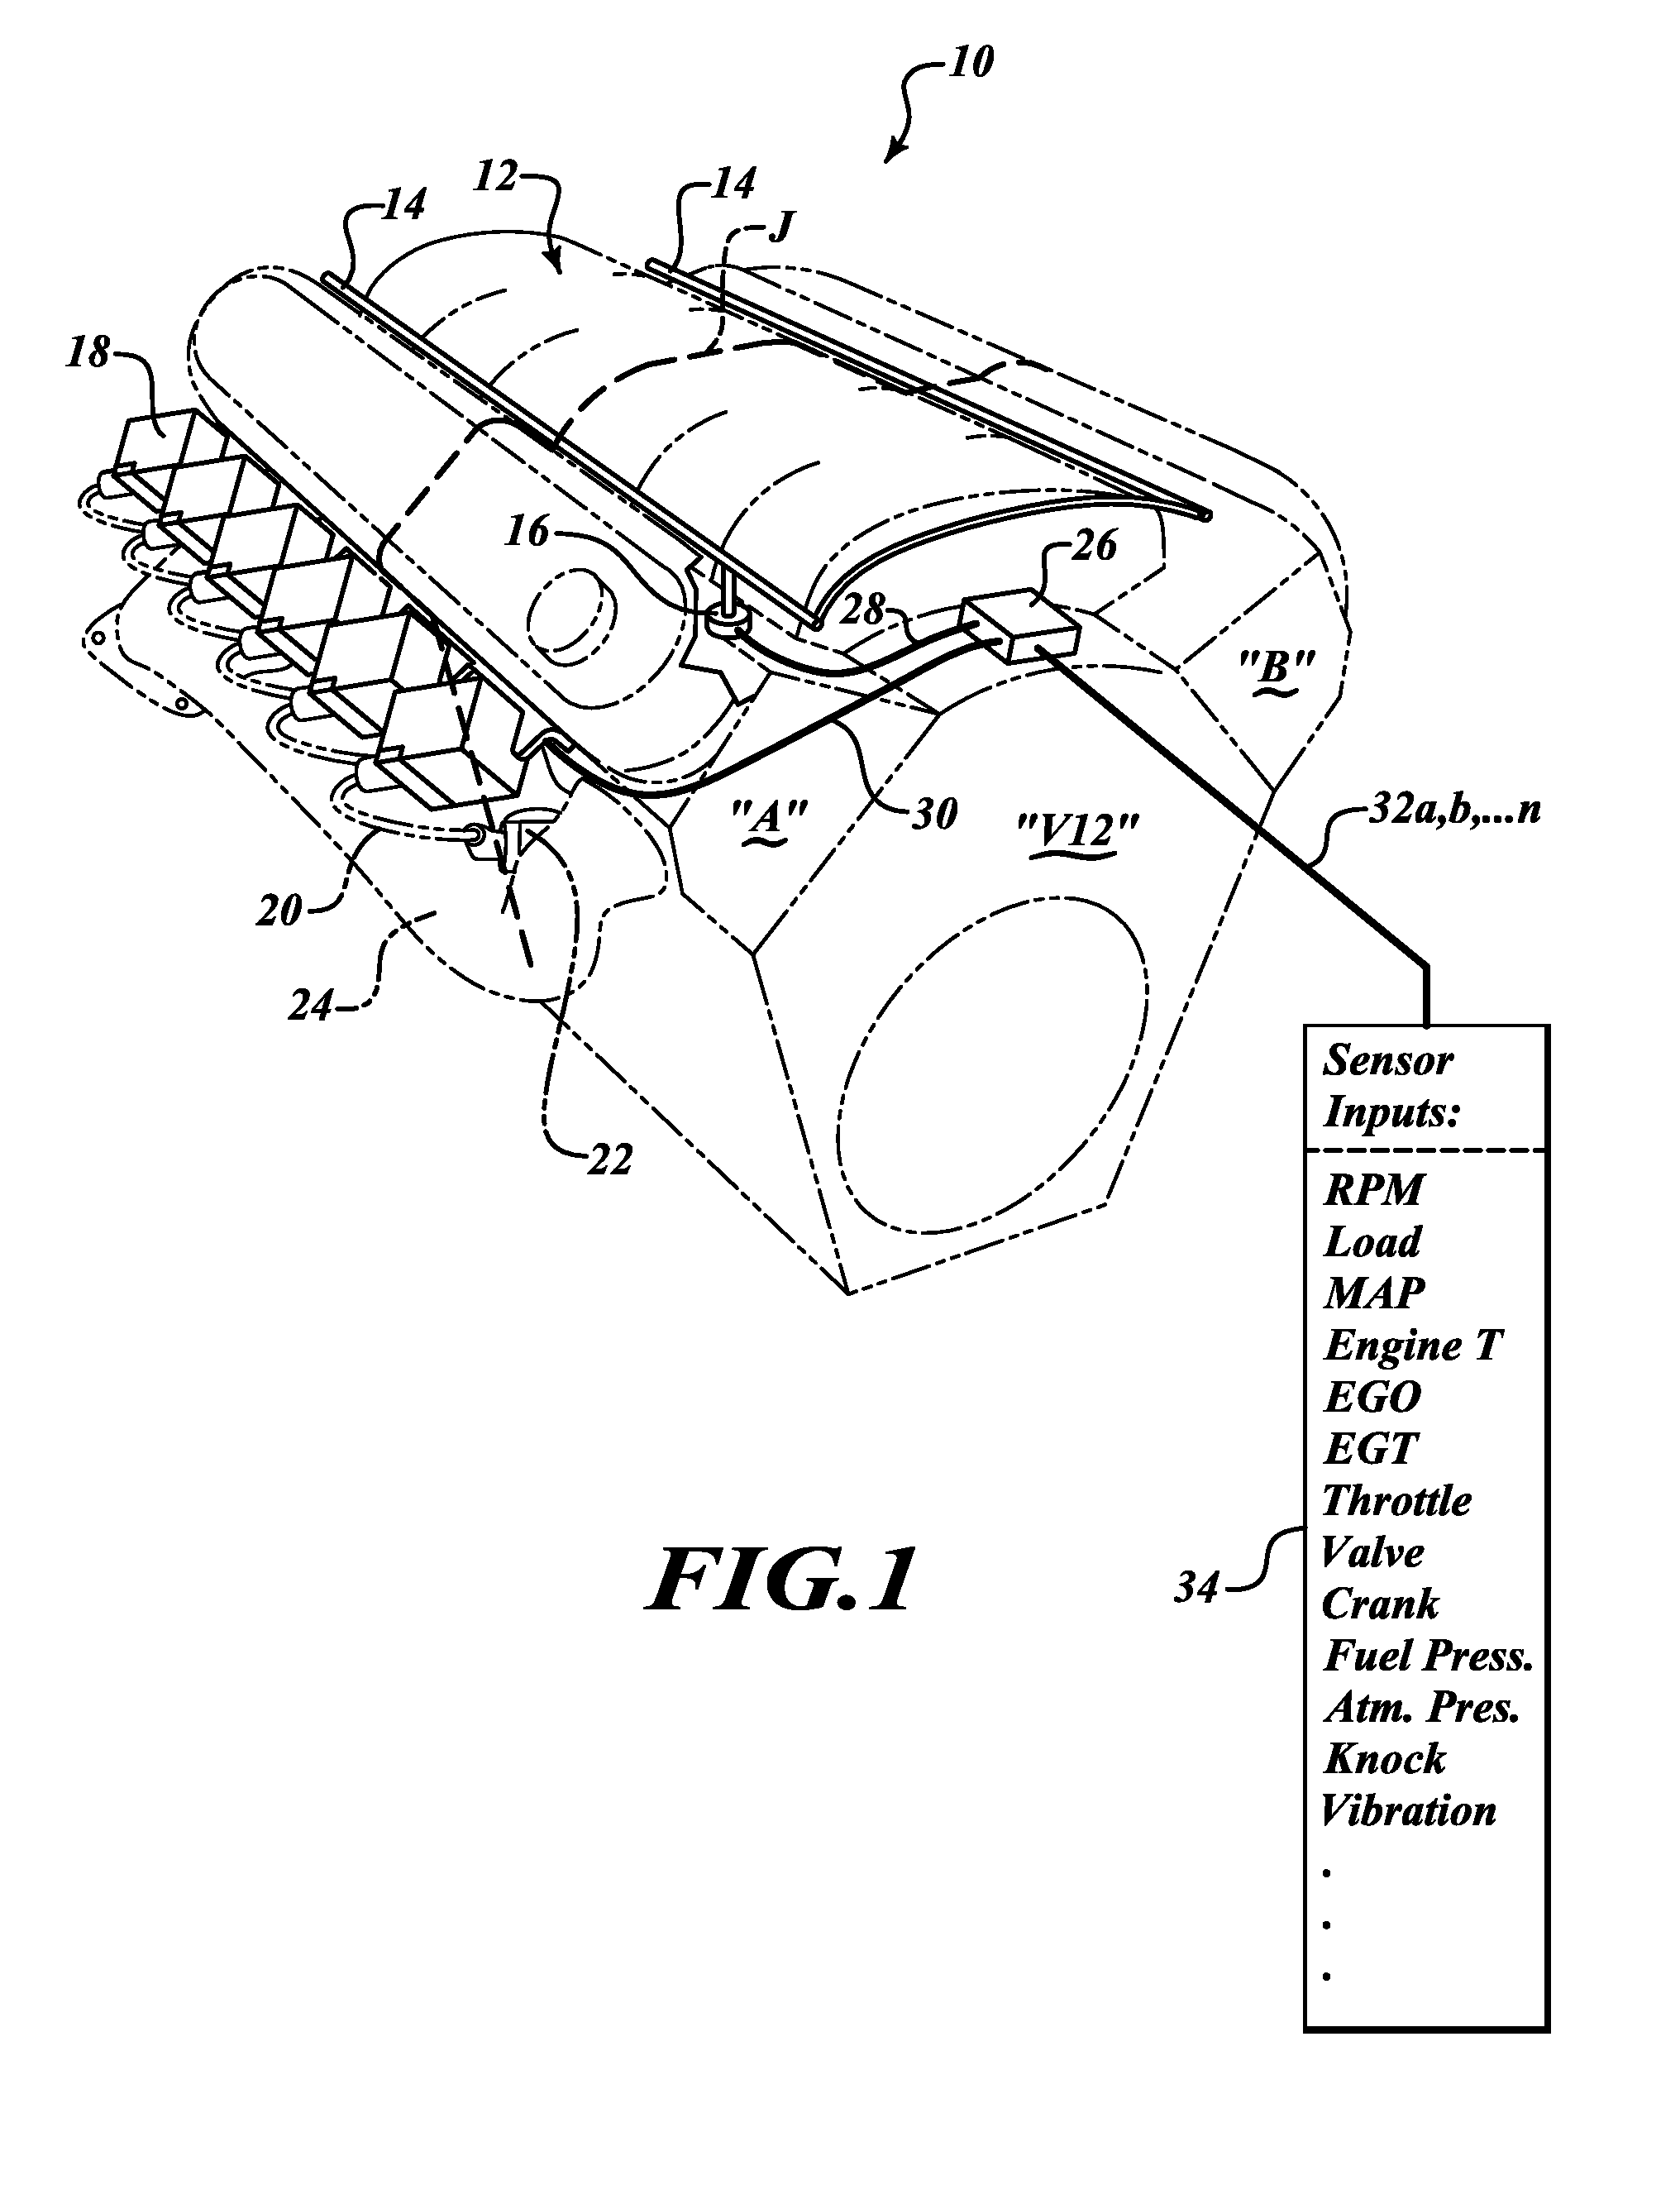 Even fire 90°V12 IC engines, fueling and firing sequence controllers, and methods of operation by PS/P technology and IFR compensation by fuel feed control